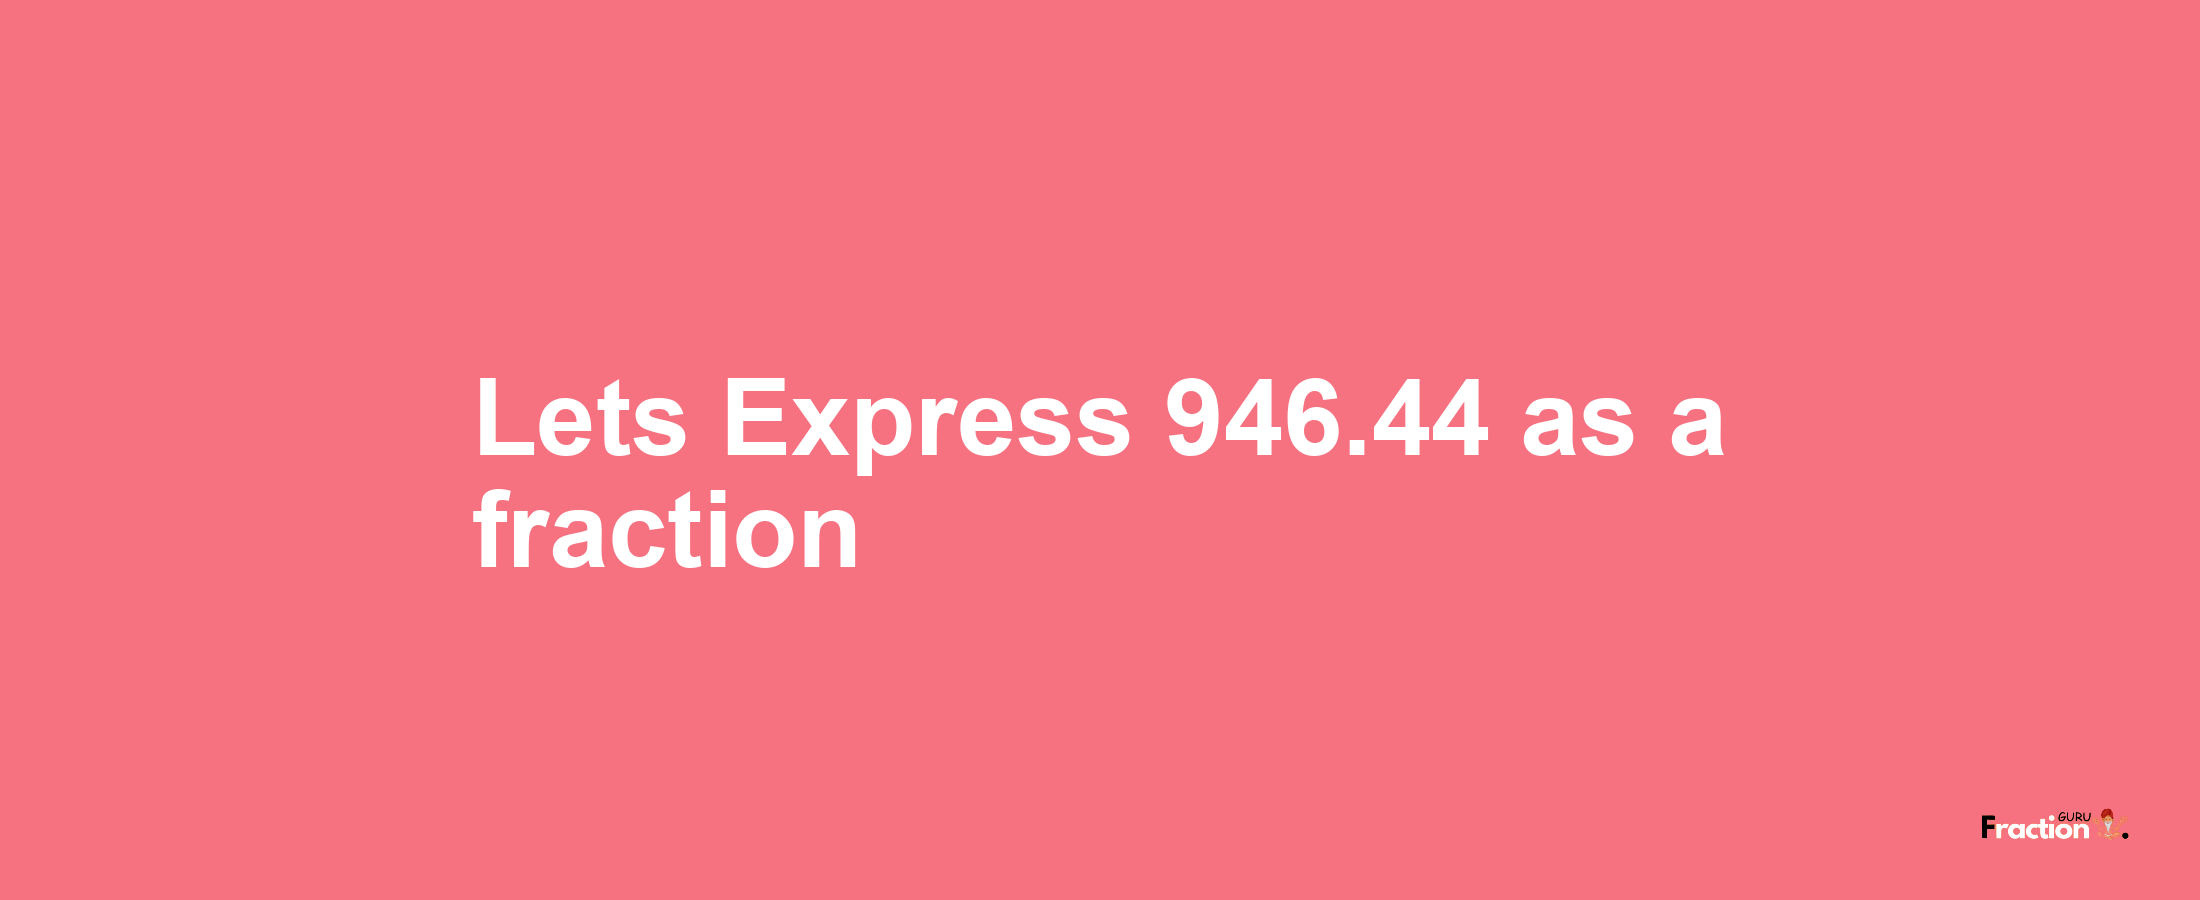 Lets Express 946.44 as afraction